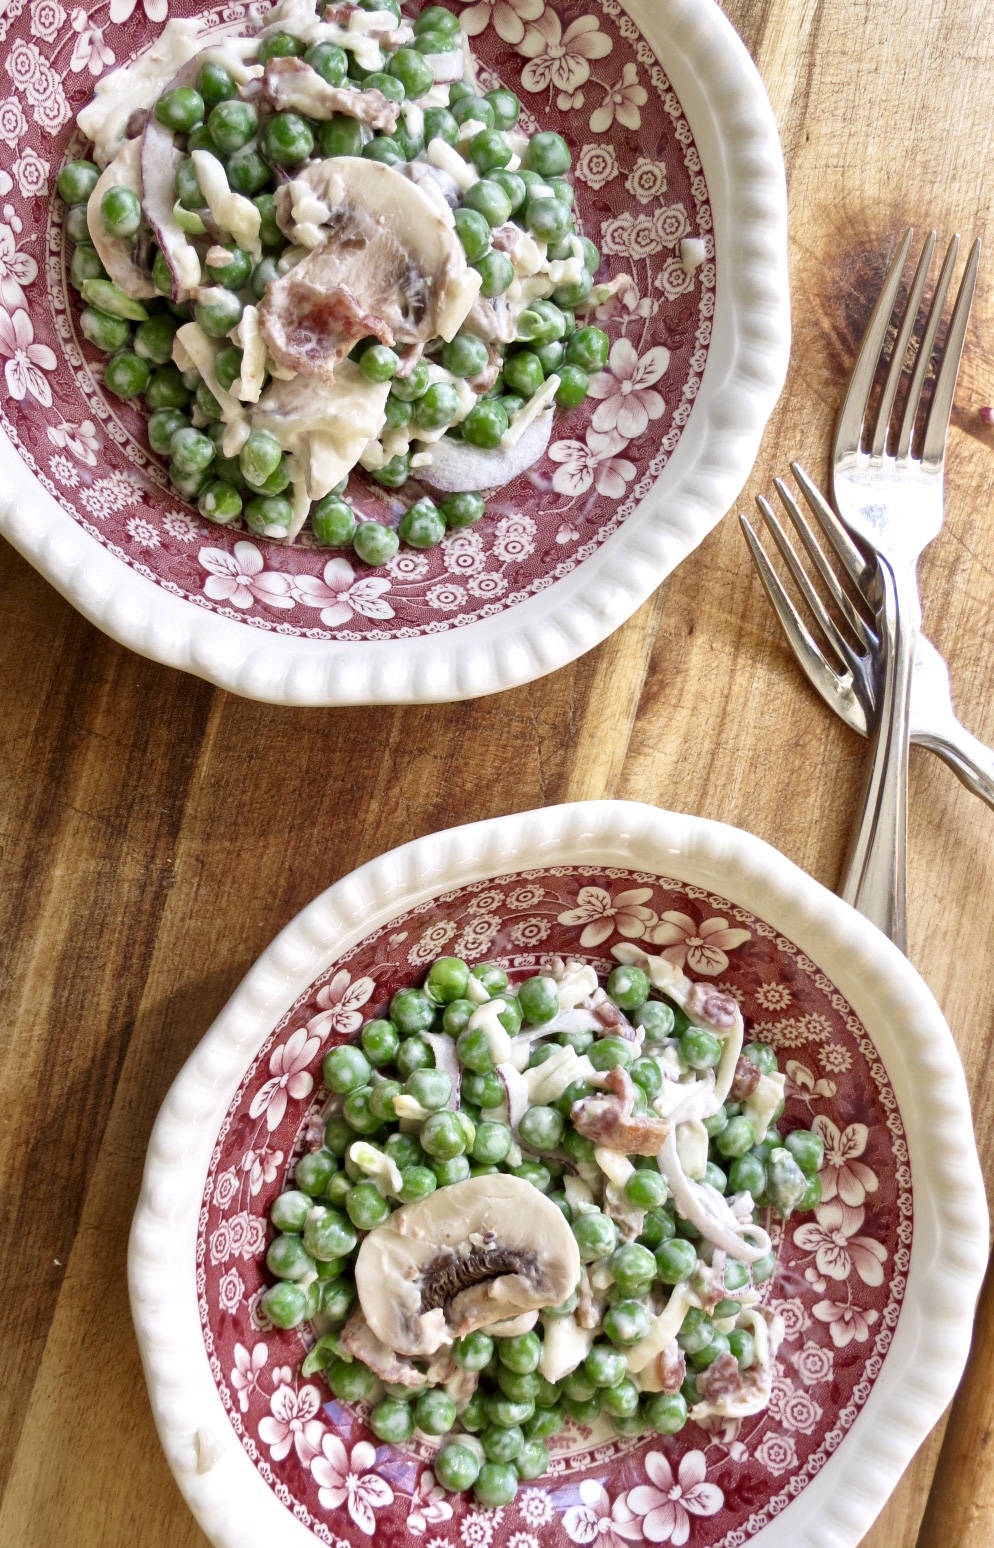 Pea Salad, The Forgotten Side Dish in 2 red and white toile bowls with forks on a wooden board.